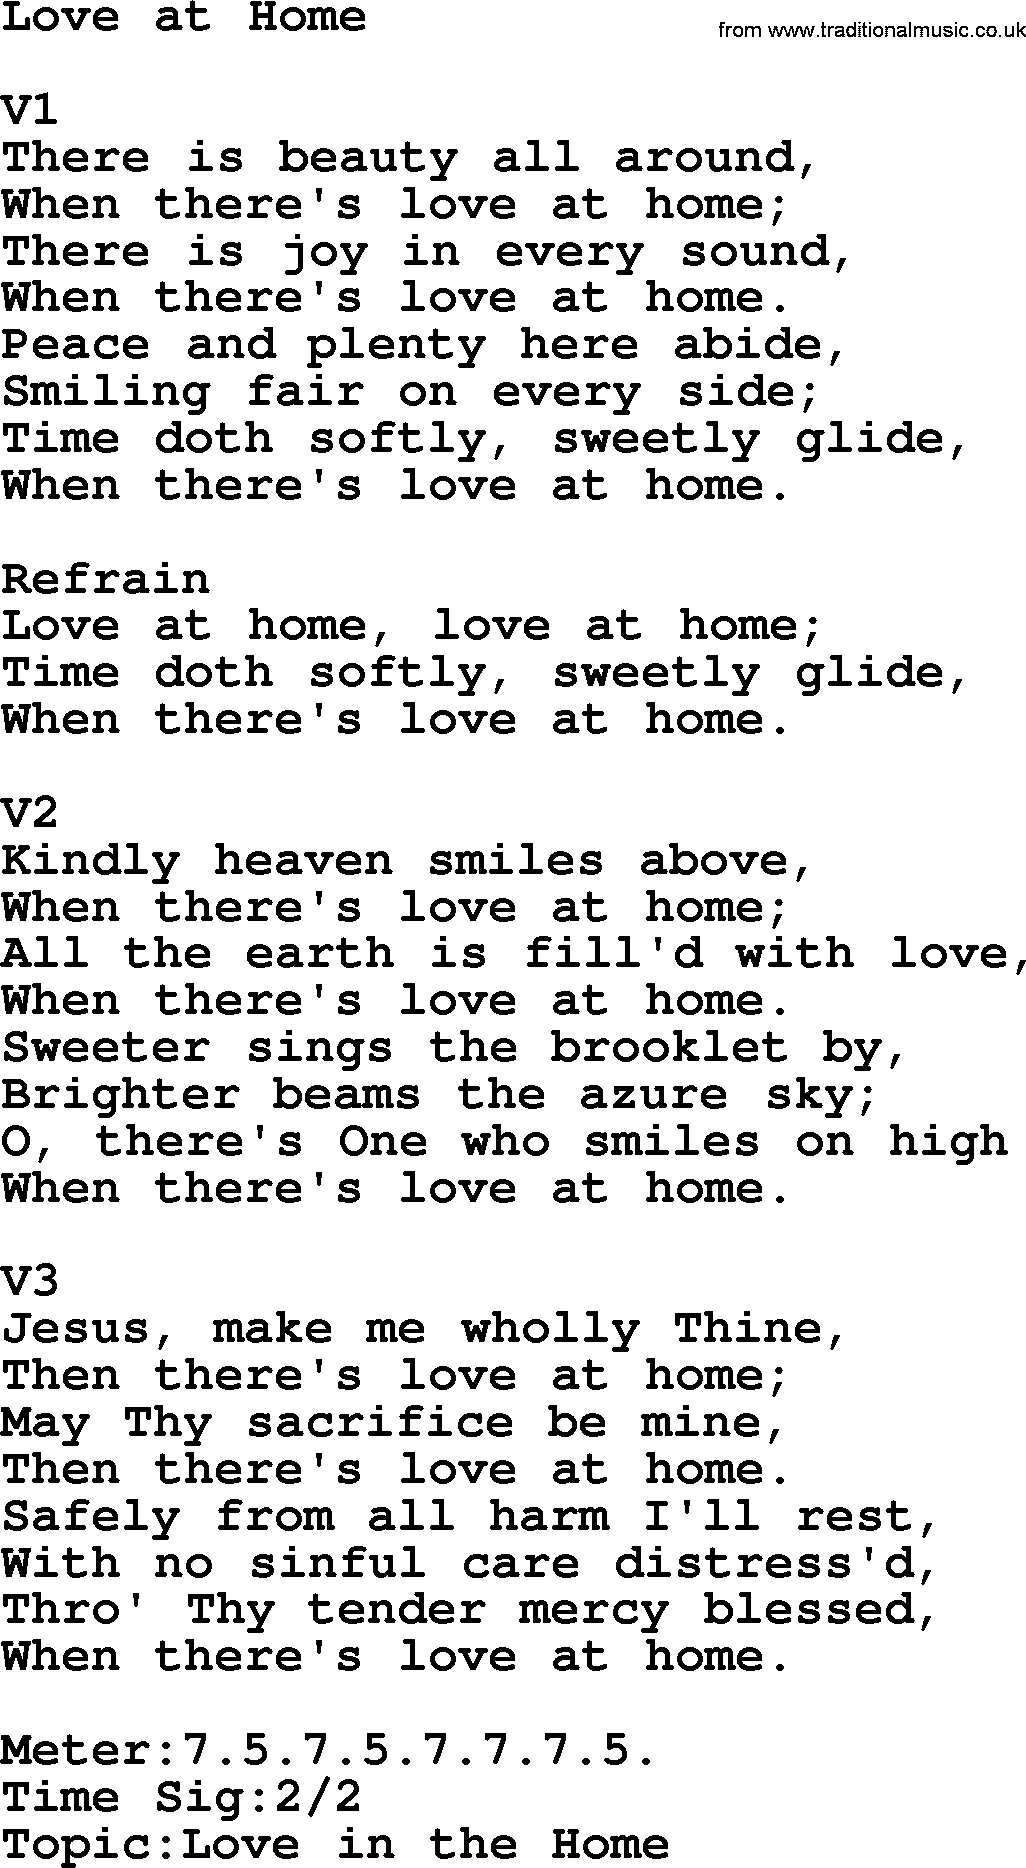 Adventist Hynms collection, Hymn: Love At Home, lyrics with PDF